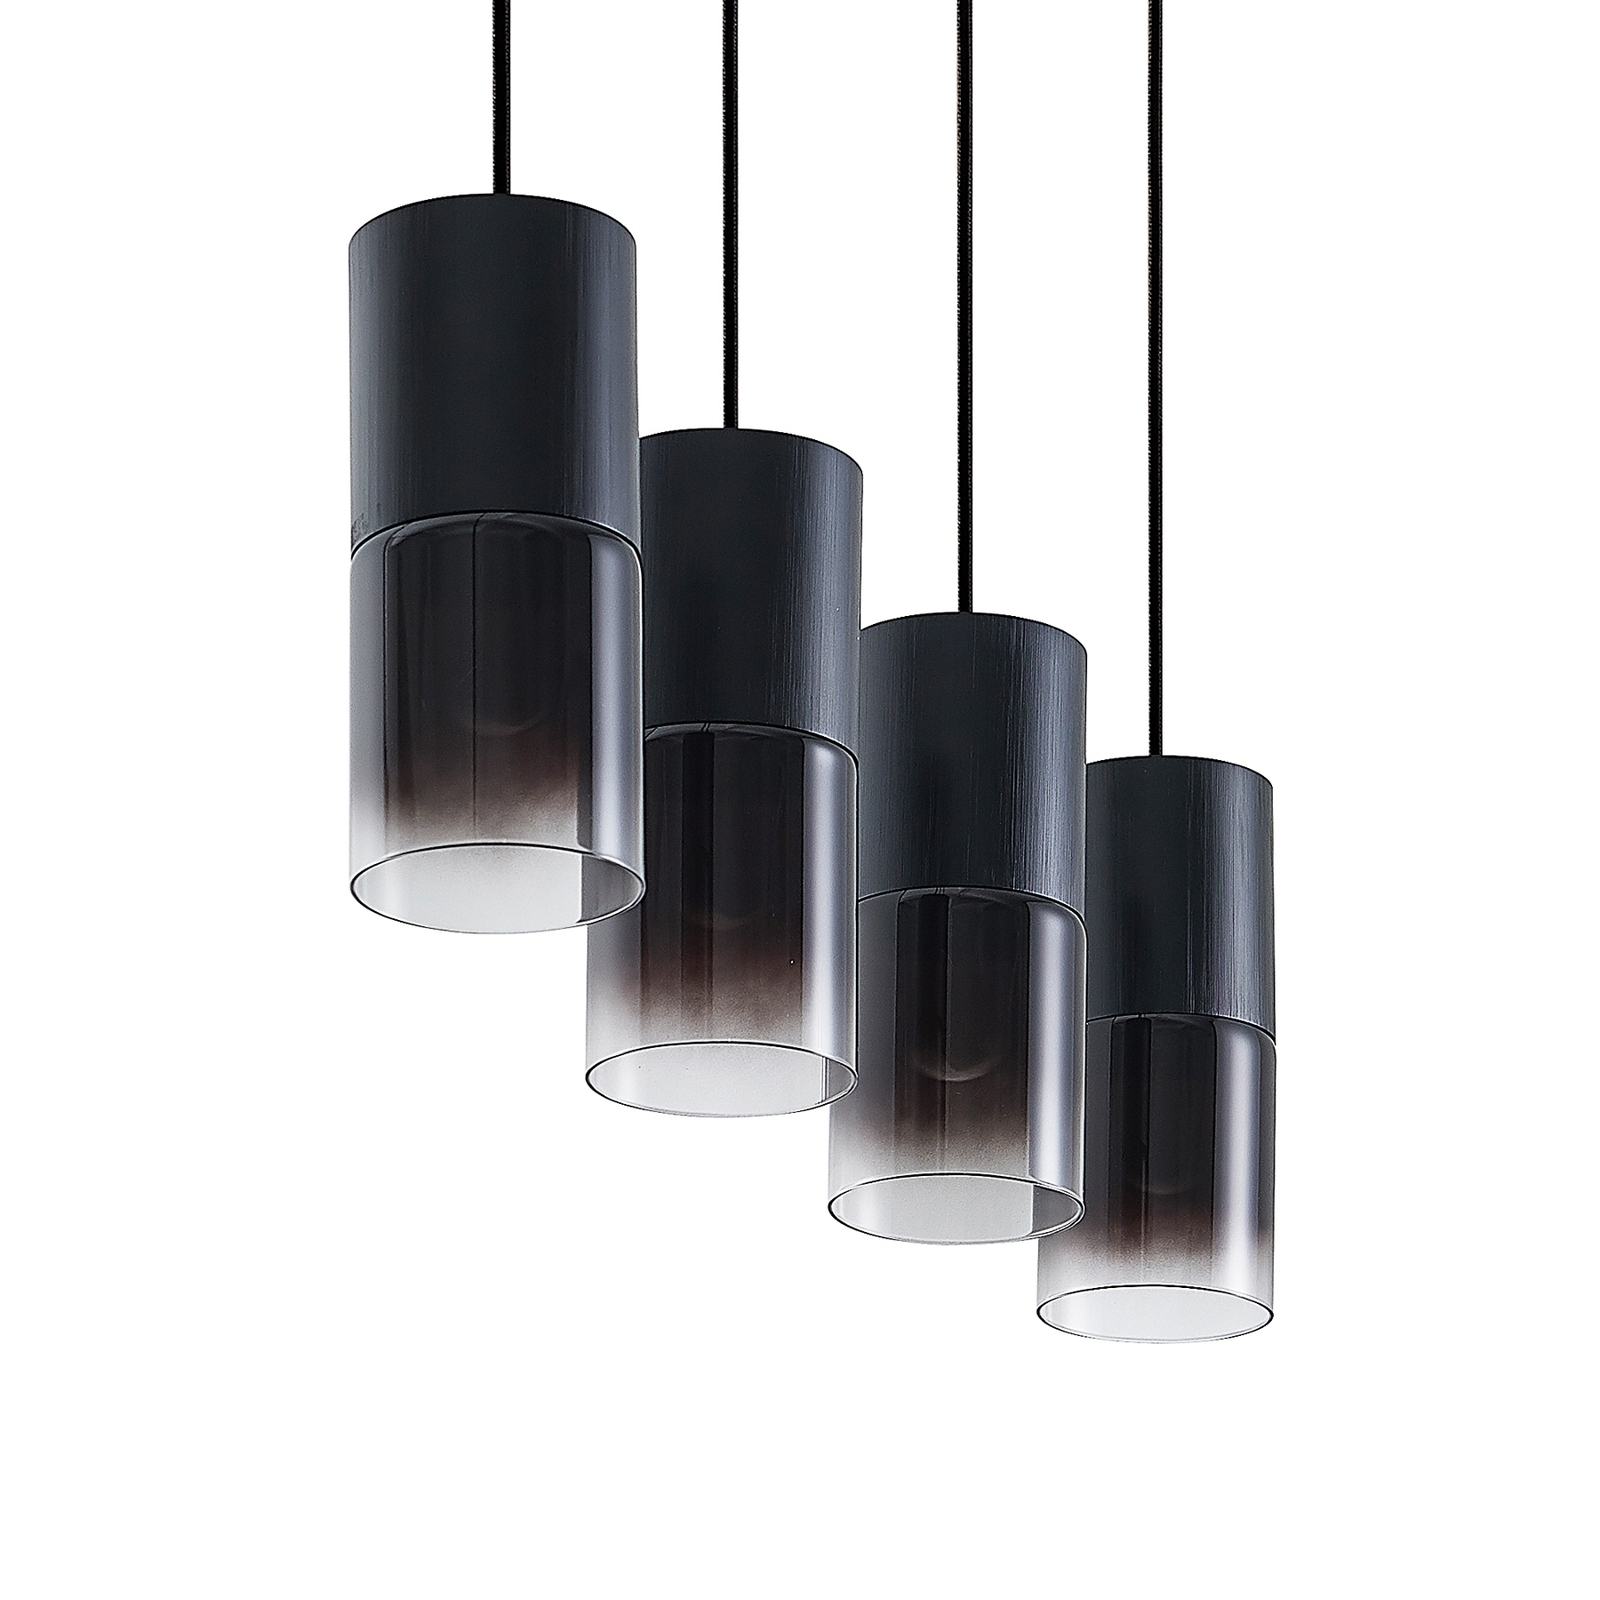 Lindby Berral pendant lamp, smoked glass four-bulb